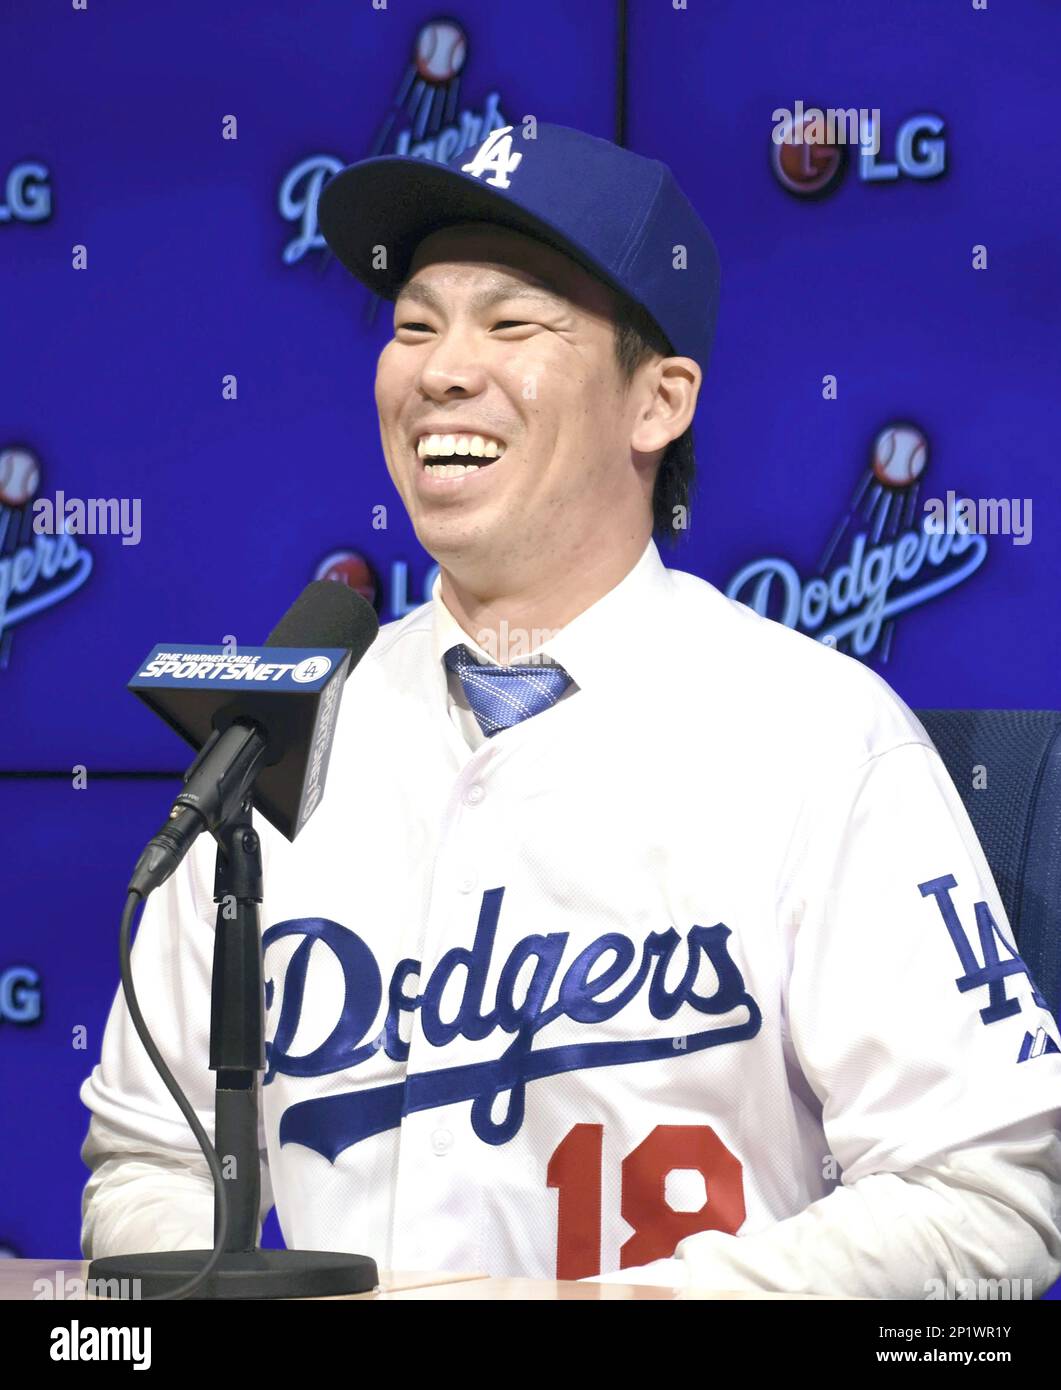 Japanese right-hand pitcher Kenta Maeda, wearing No. 18, speaks during his  introductory press conference at Dodger Stadium in Los Angenles on Jan. 7,  2016. The former Hiroshima Carp ace made the official